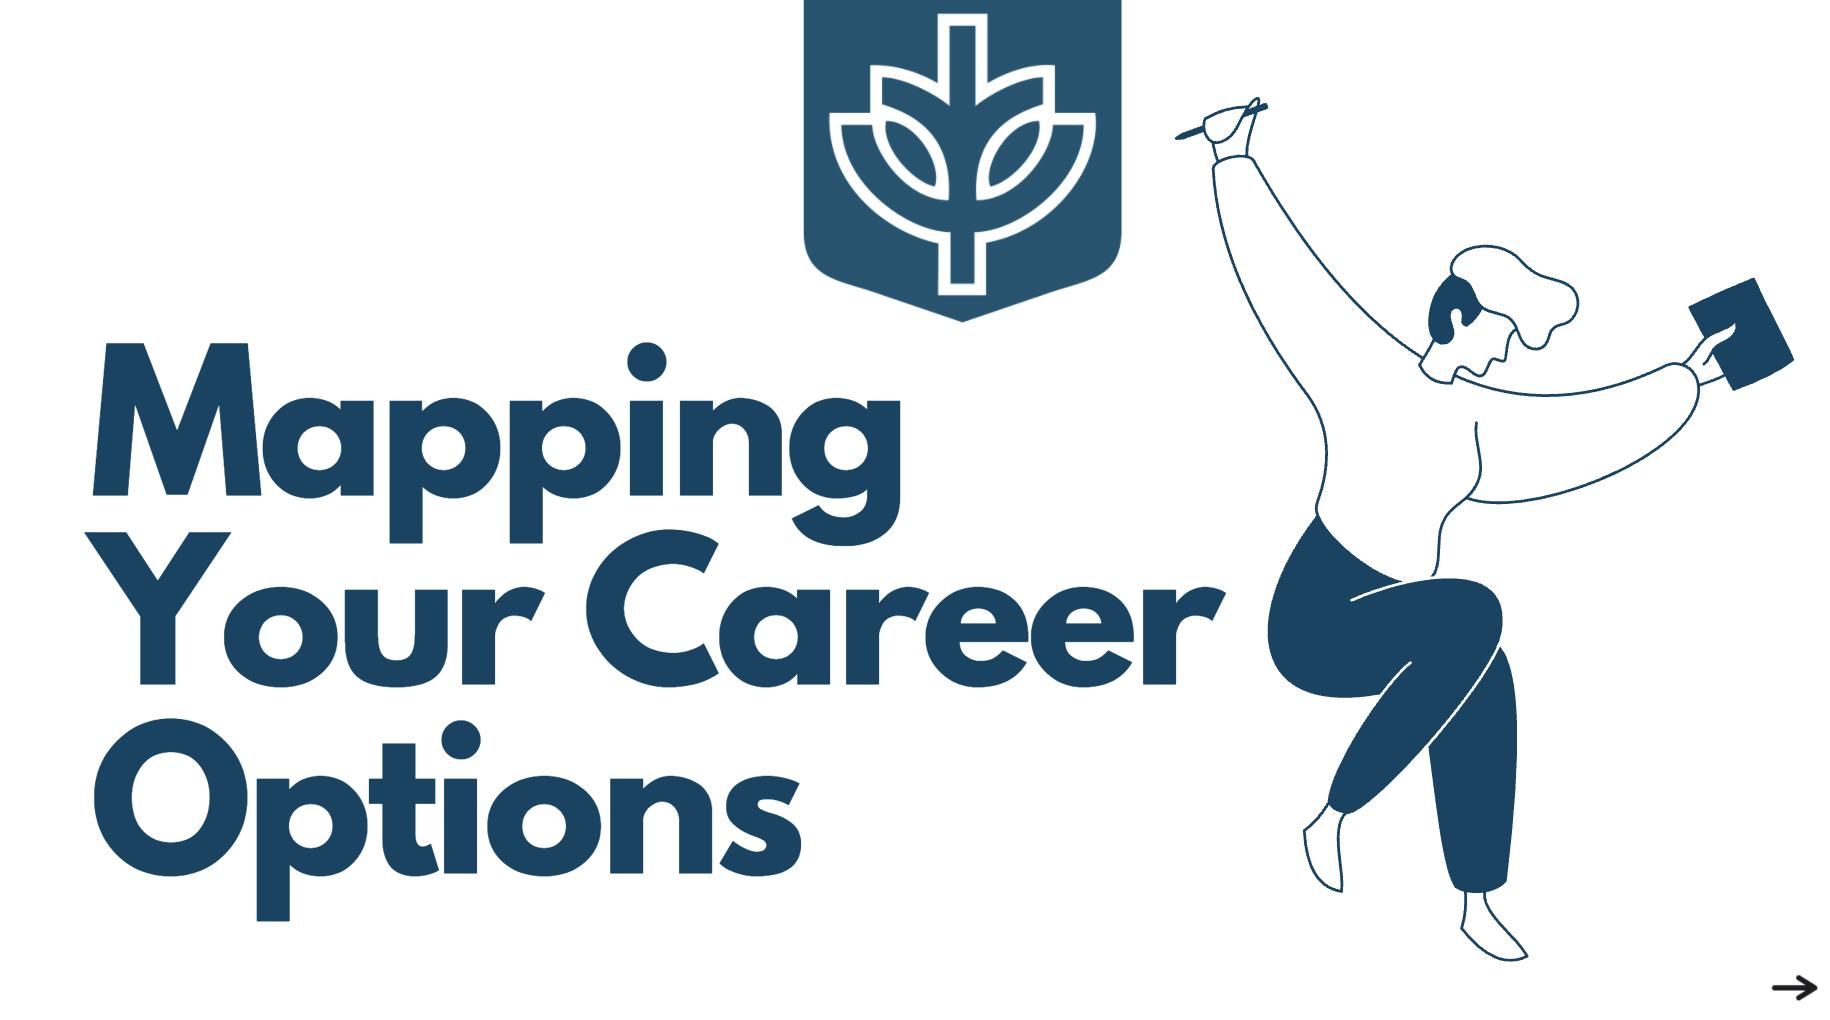 Mapping Your Career Options